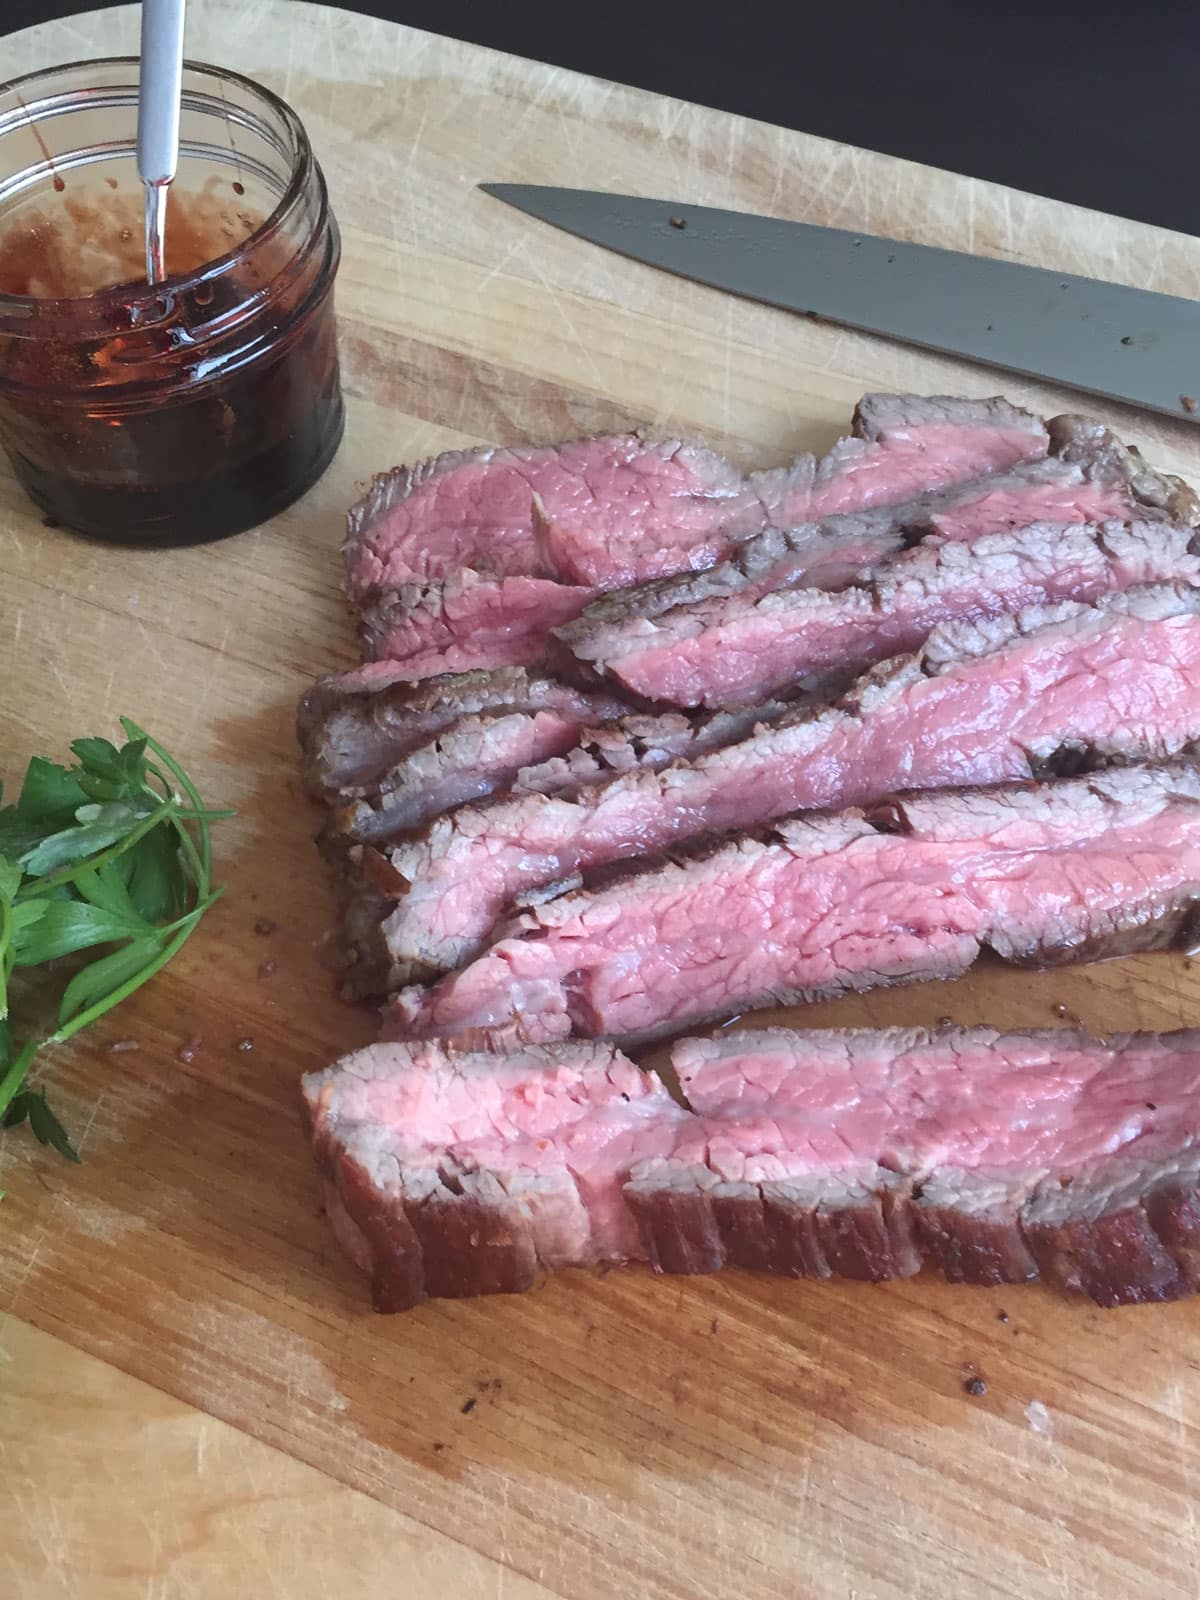 Flank steak on cutting board with pomegranate molasses on the side.